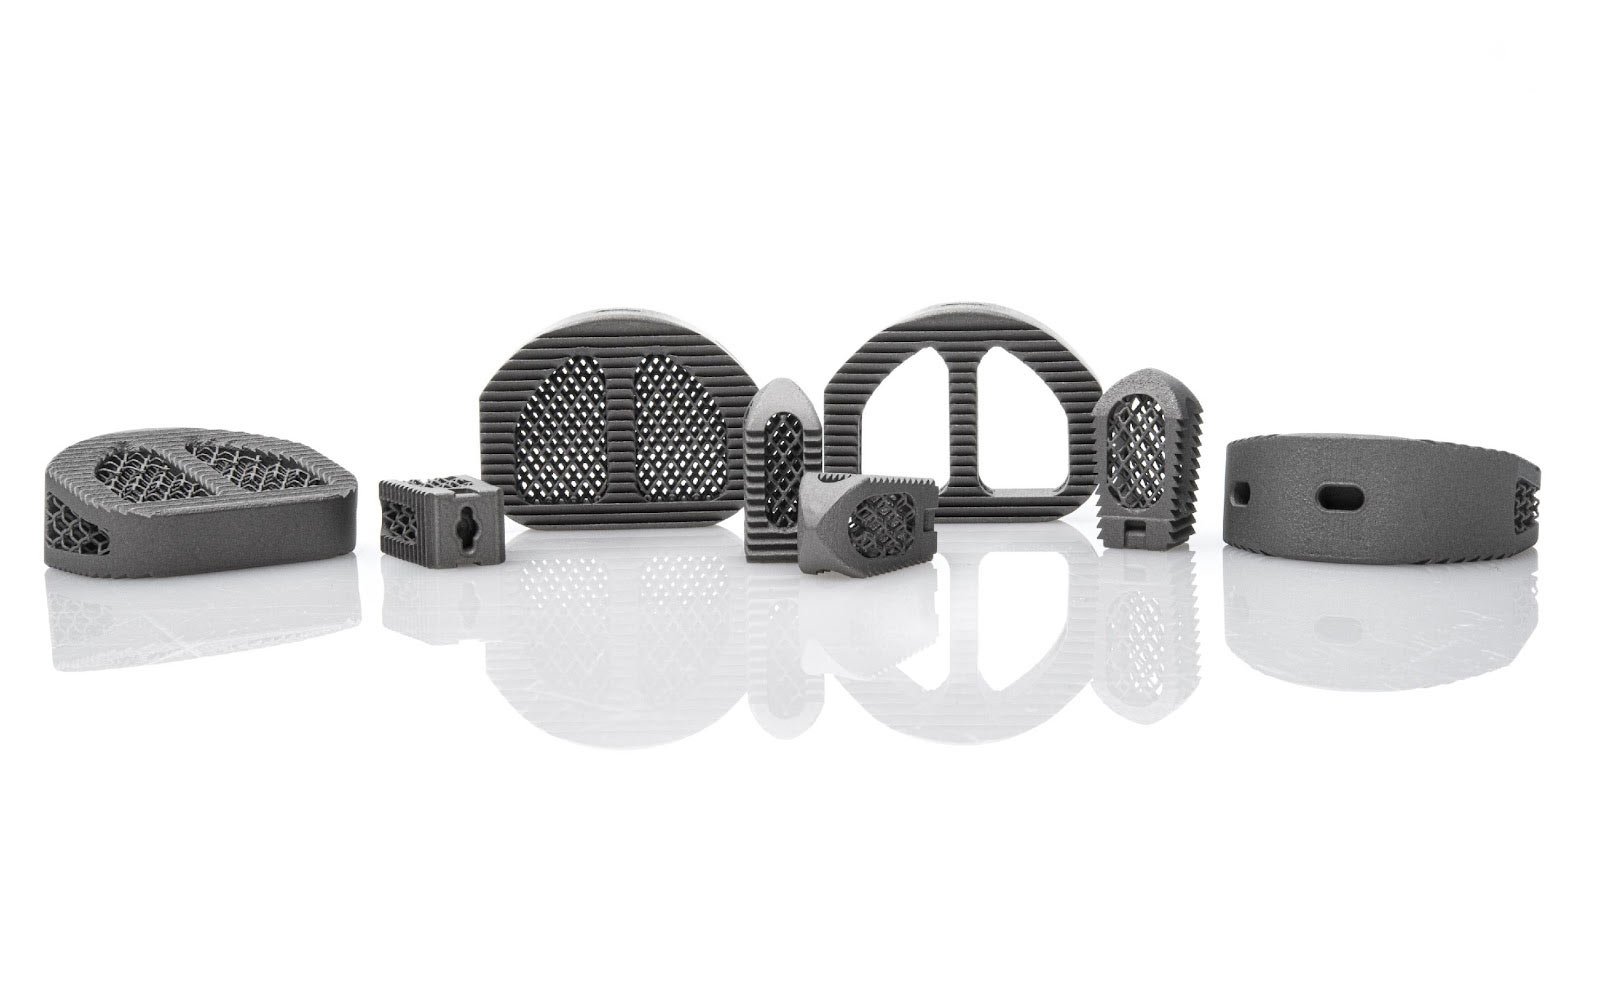 Image that shows Amnovis 3D printing titanium spinal implants